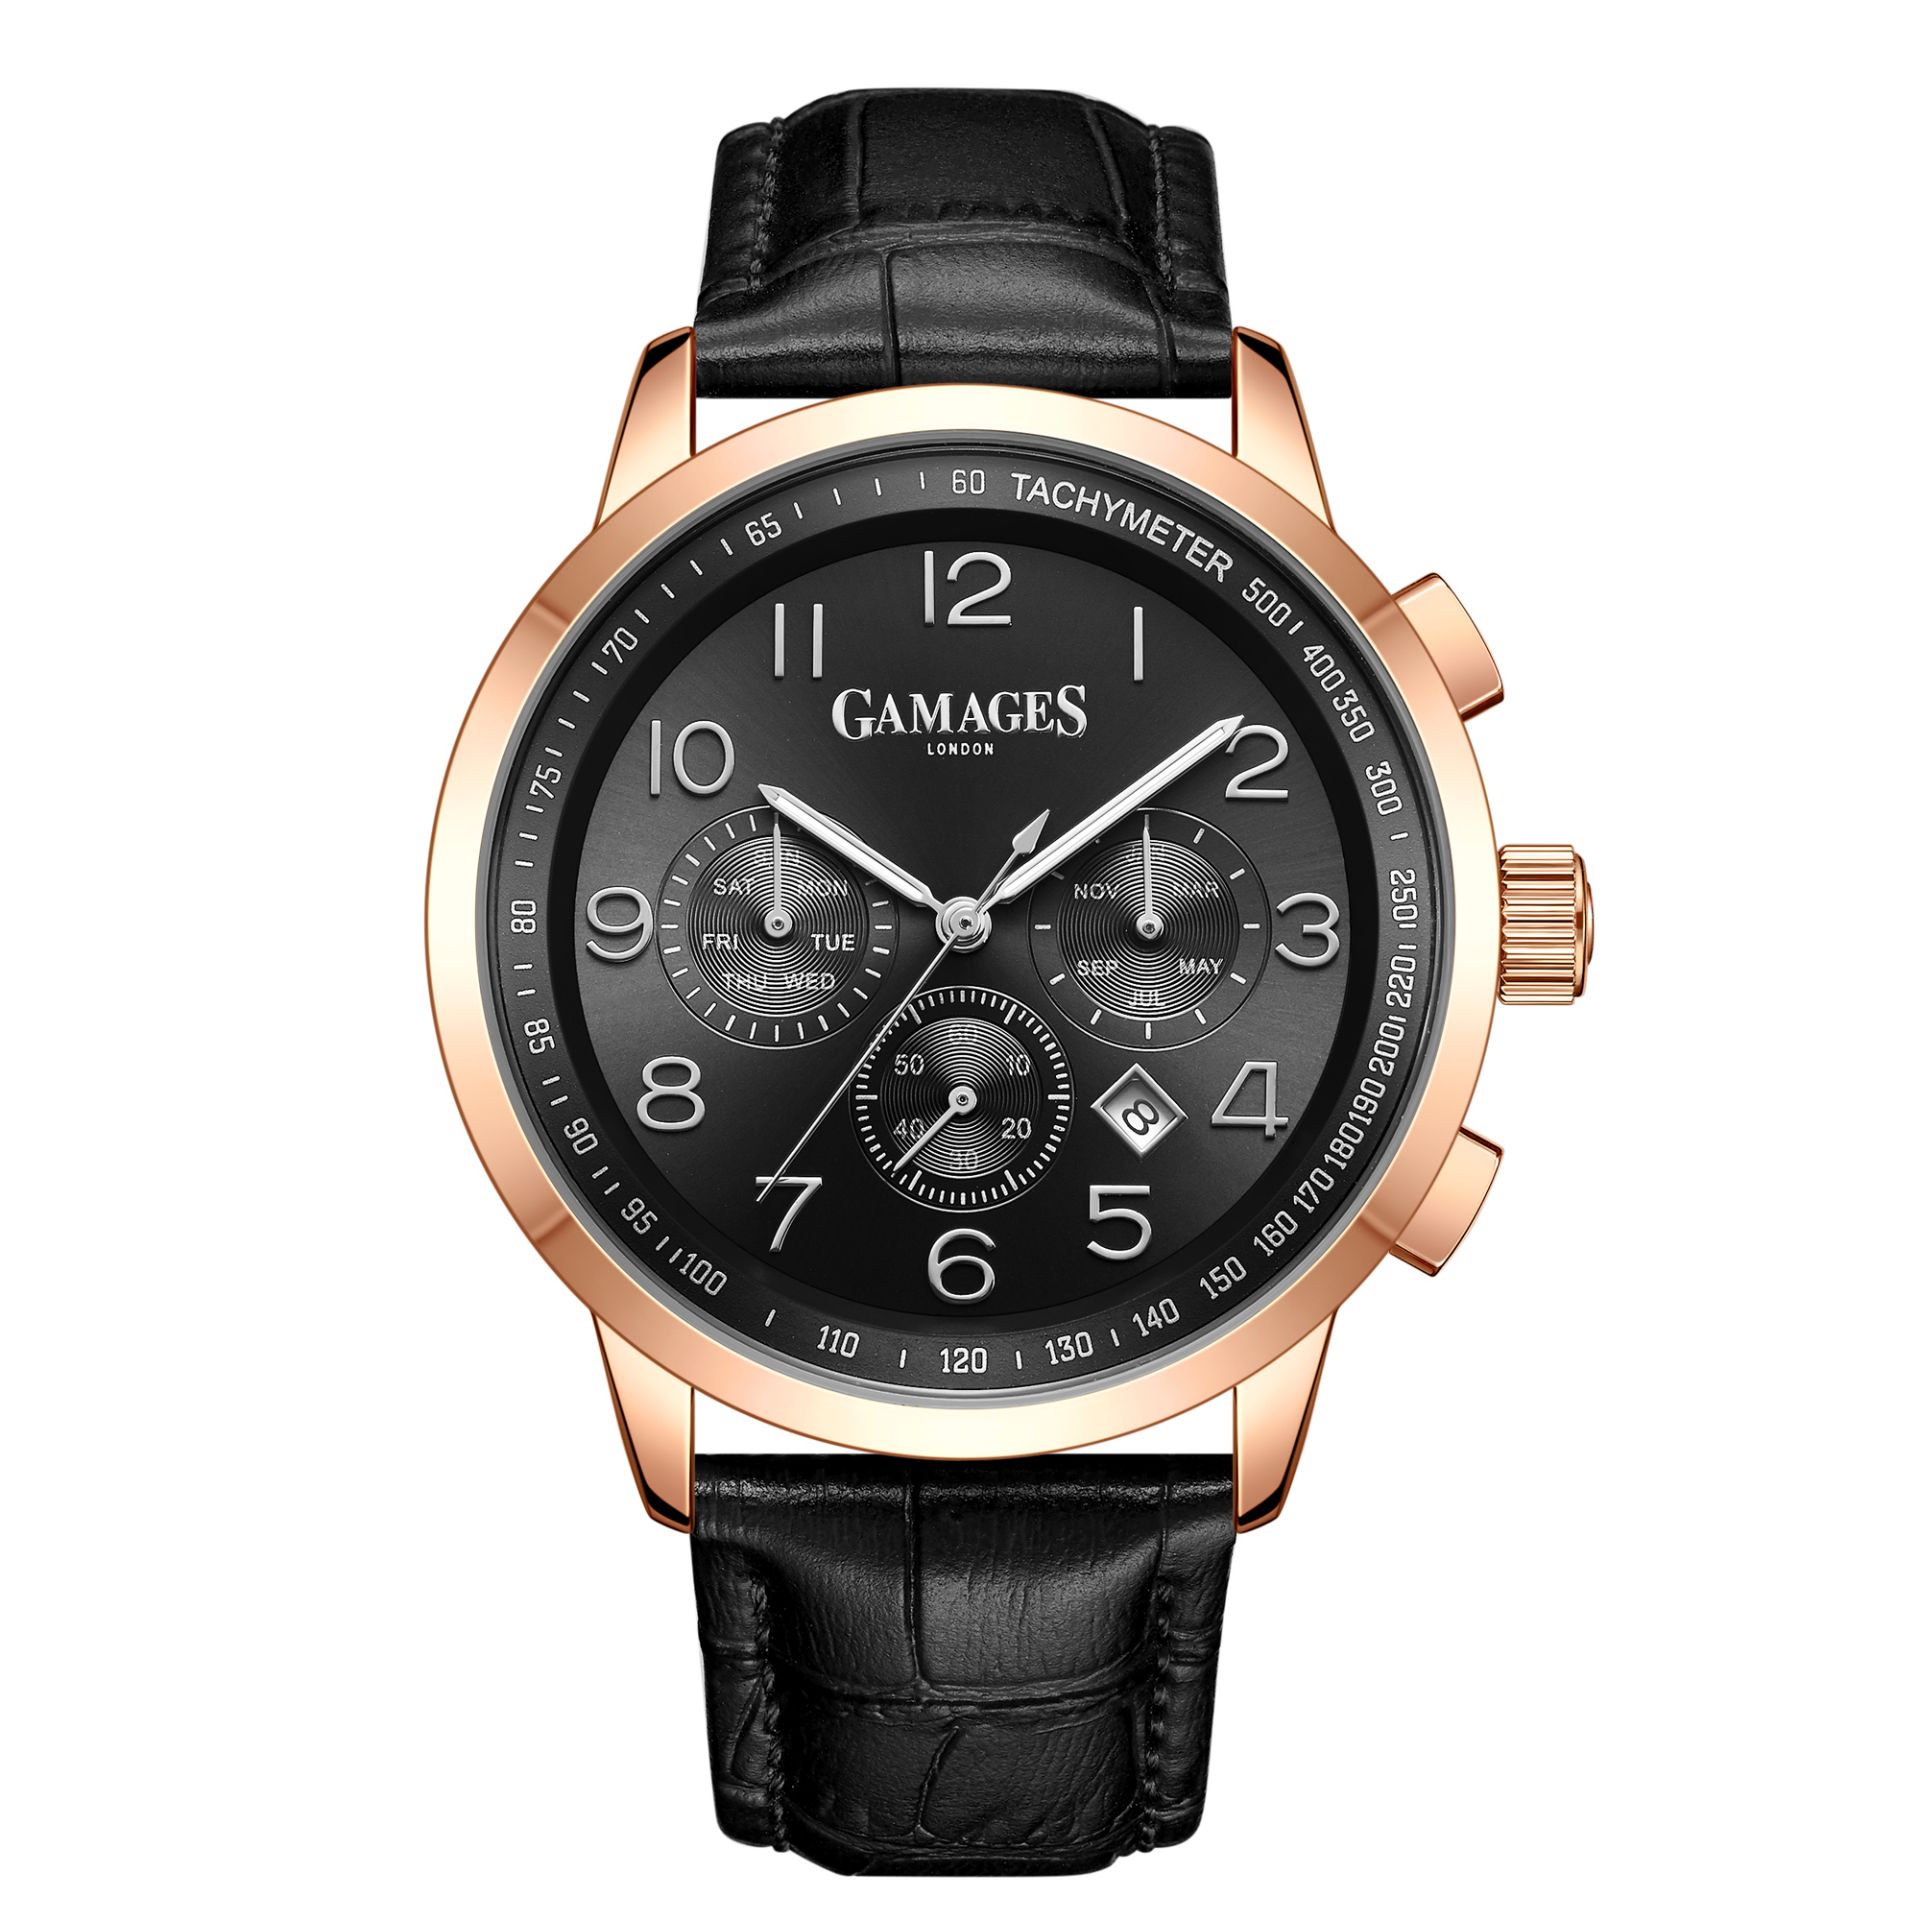 Ltd Edition Hand Assembled Gamages Clasique Automatic Black Dial - 5 Year Warranty & Free Delivery - Image 2 of 4